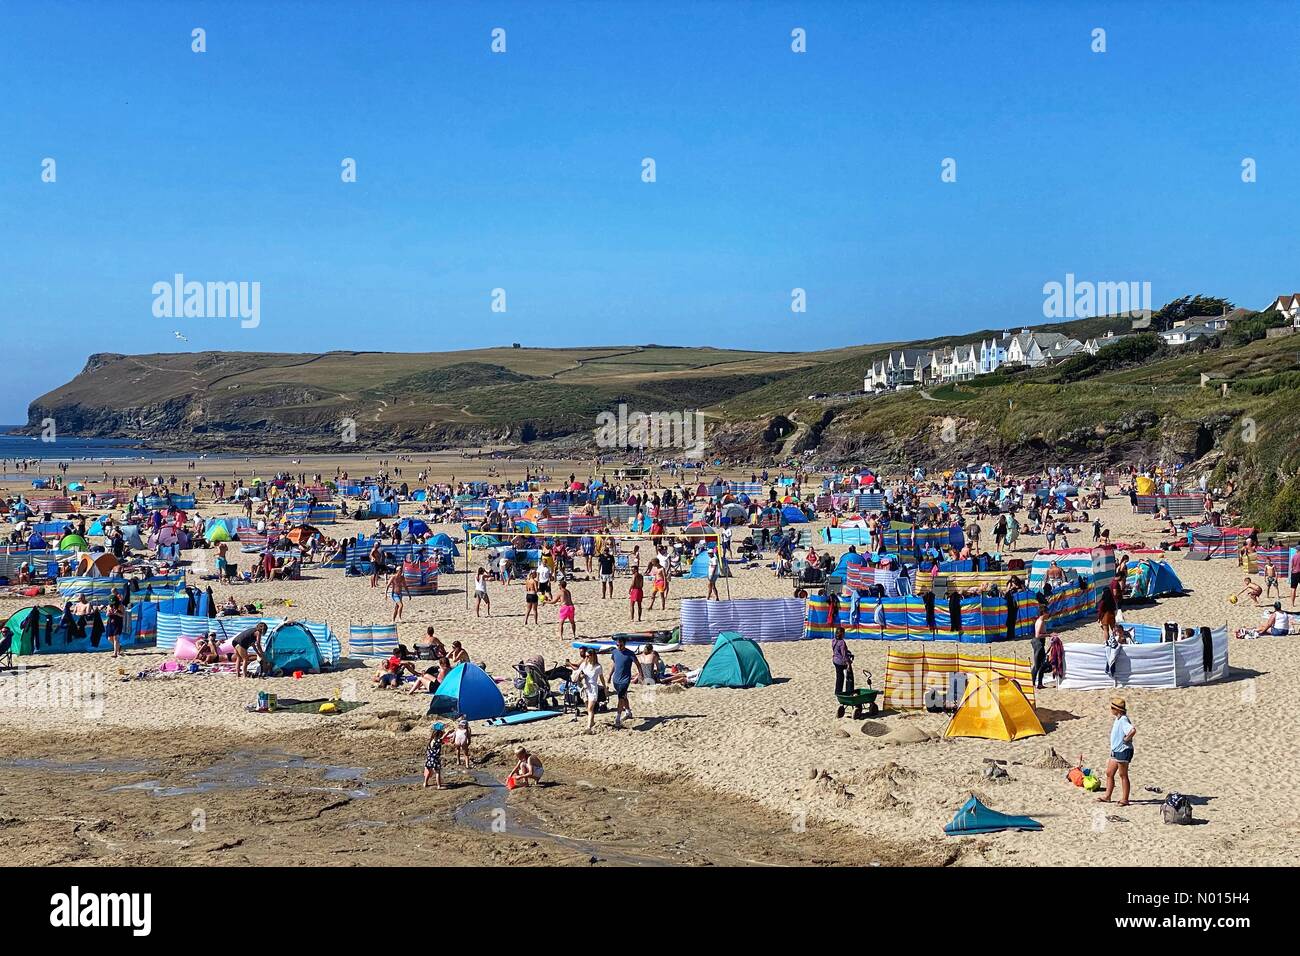 UK Weather: Crowded Polzeath beach despite Covid warnings at the start of the bank holiday weekend in Cornwall, UK. 27th August, 2021. Credit nidpor/Alamy Live News Credit: nidpor/StockimoNews/Alamy Live News Stock Photo